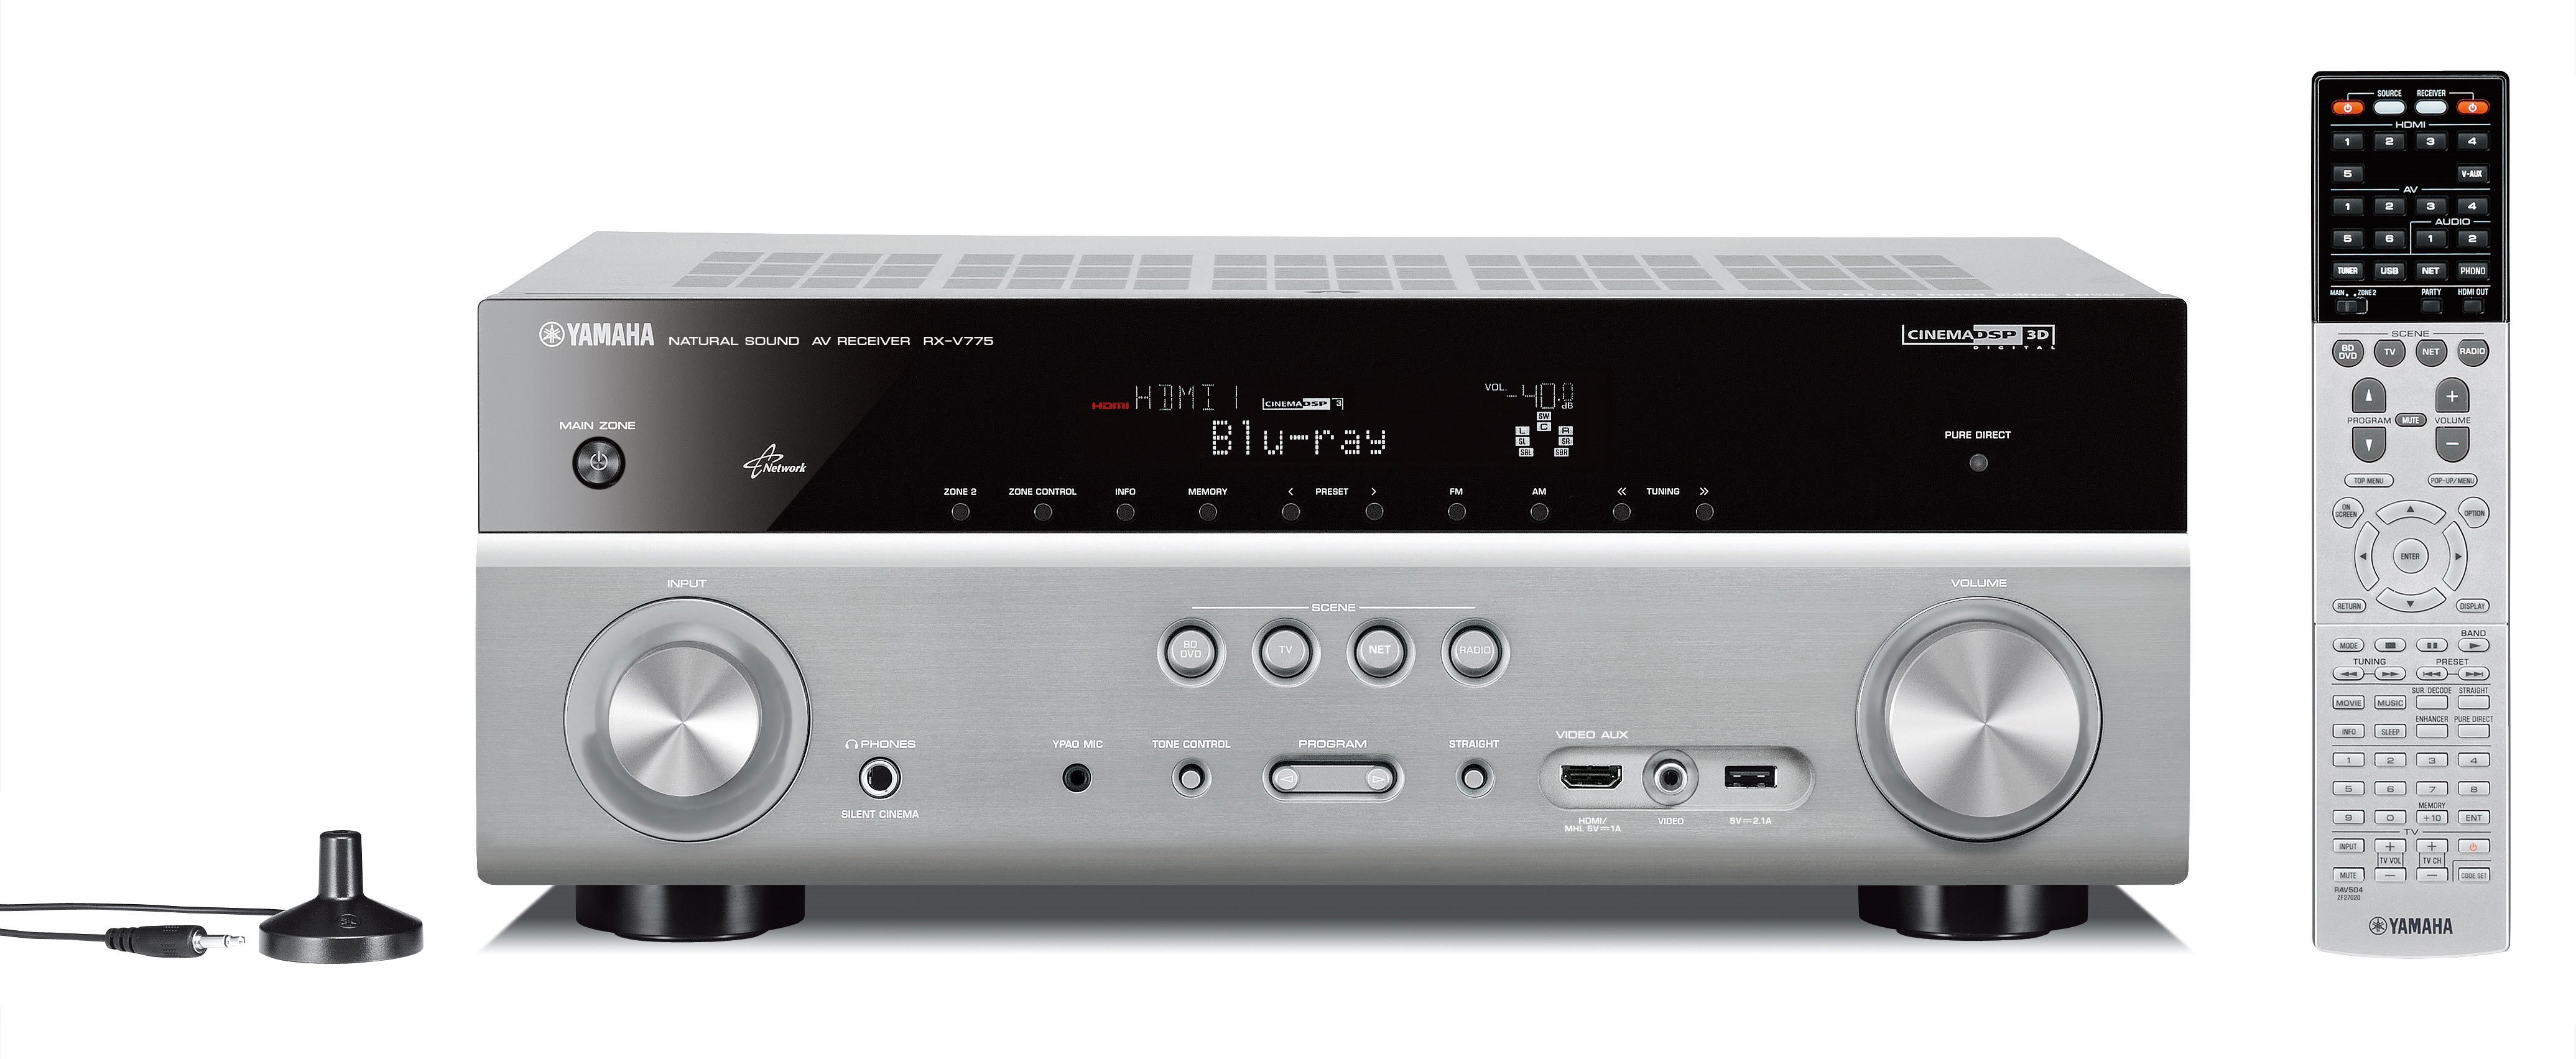 RX-V775 - Overview - AV Receivers - Audio & Visual - Products 